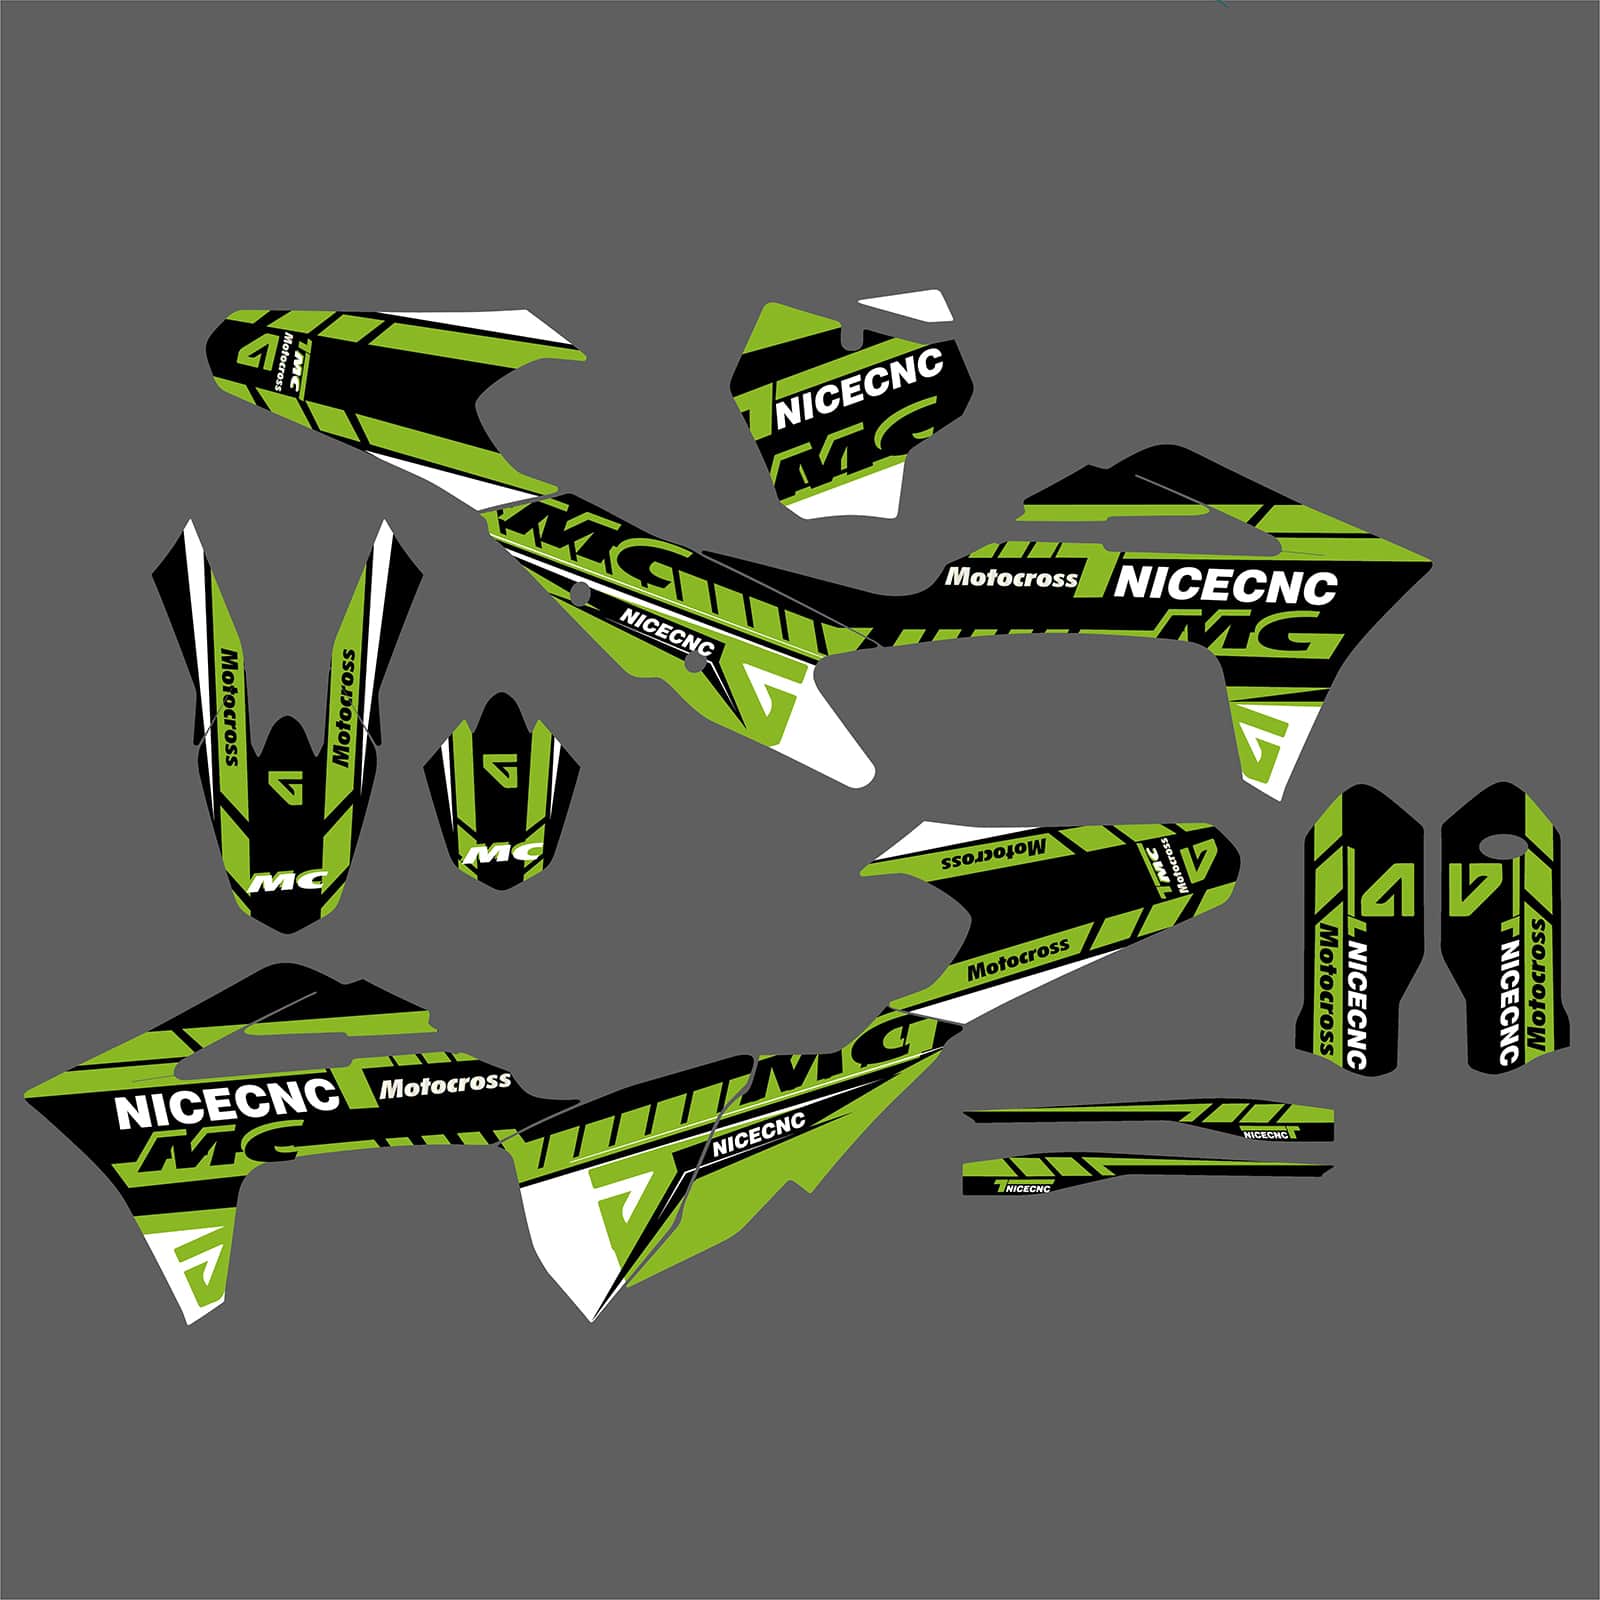 Motorcycle Team Full Graphics Background Sticker Decal Kits For GAS GAS MC Motocross 2021-2023